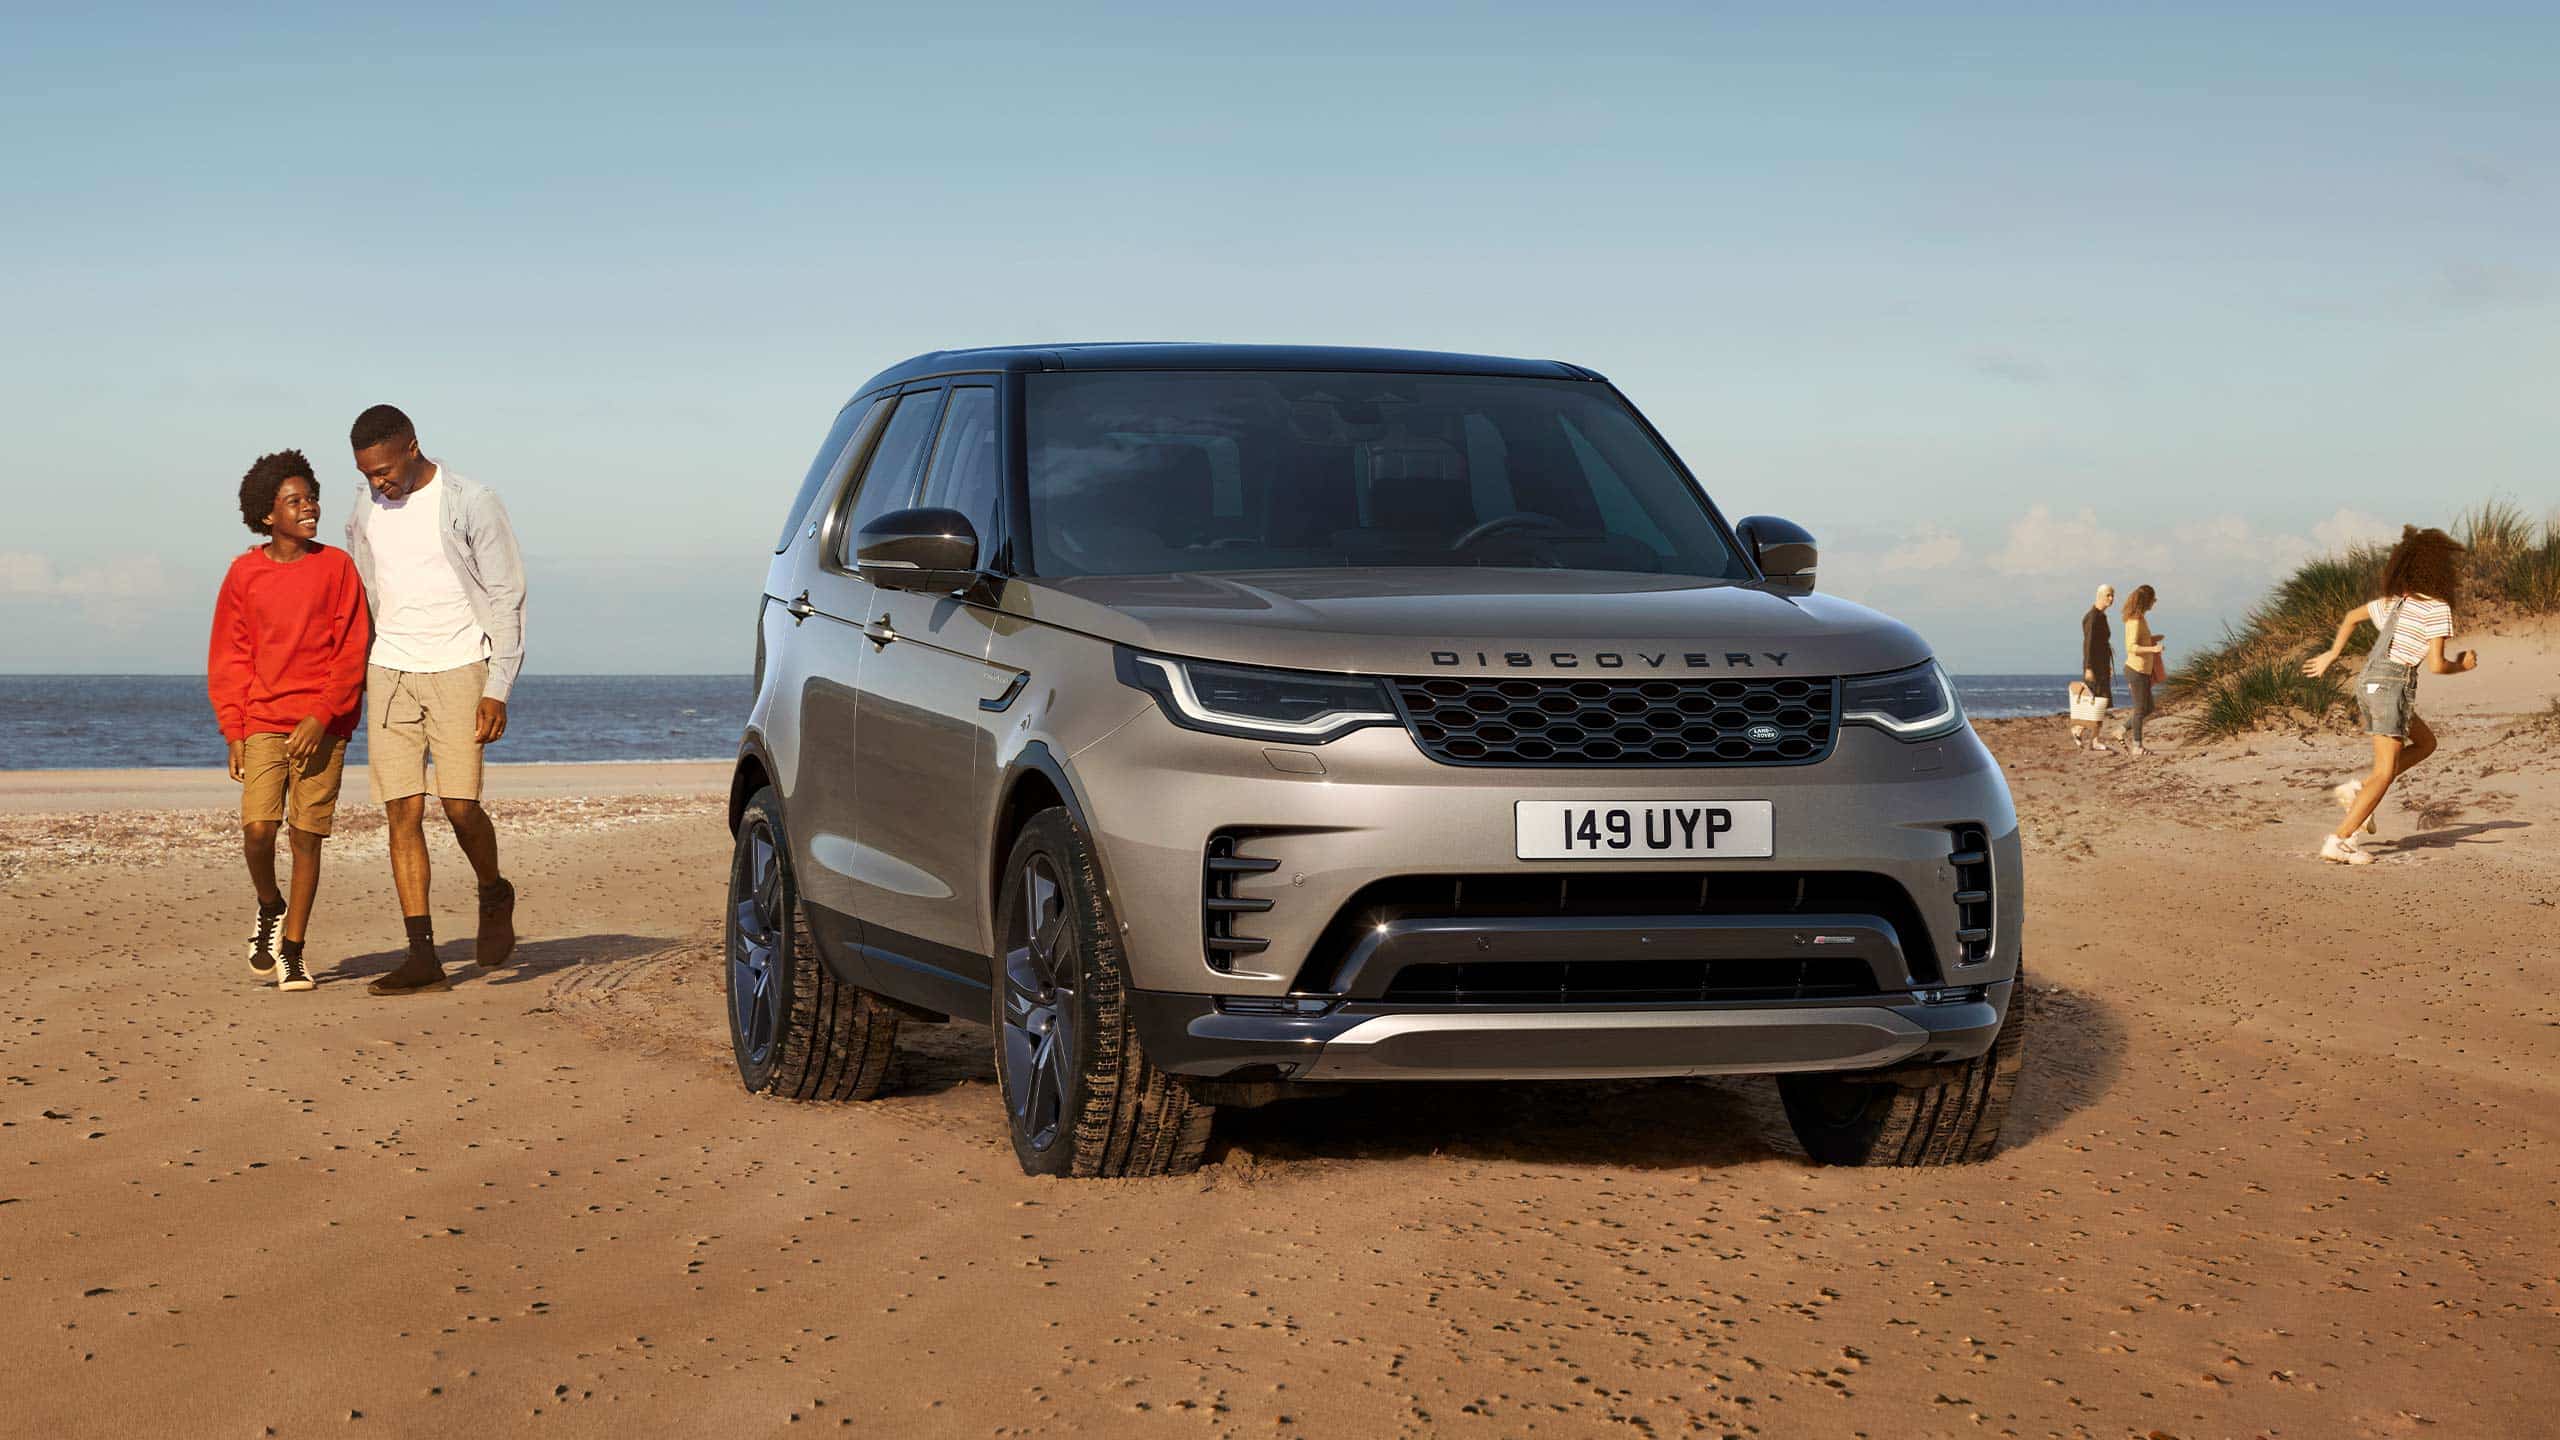 Family Picnic On A Beach Side With Discovery